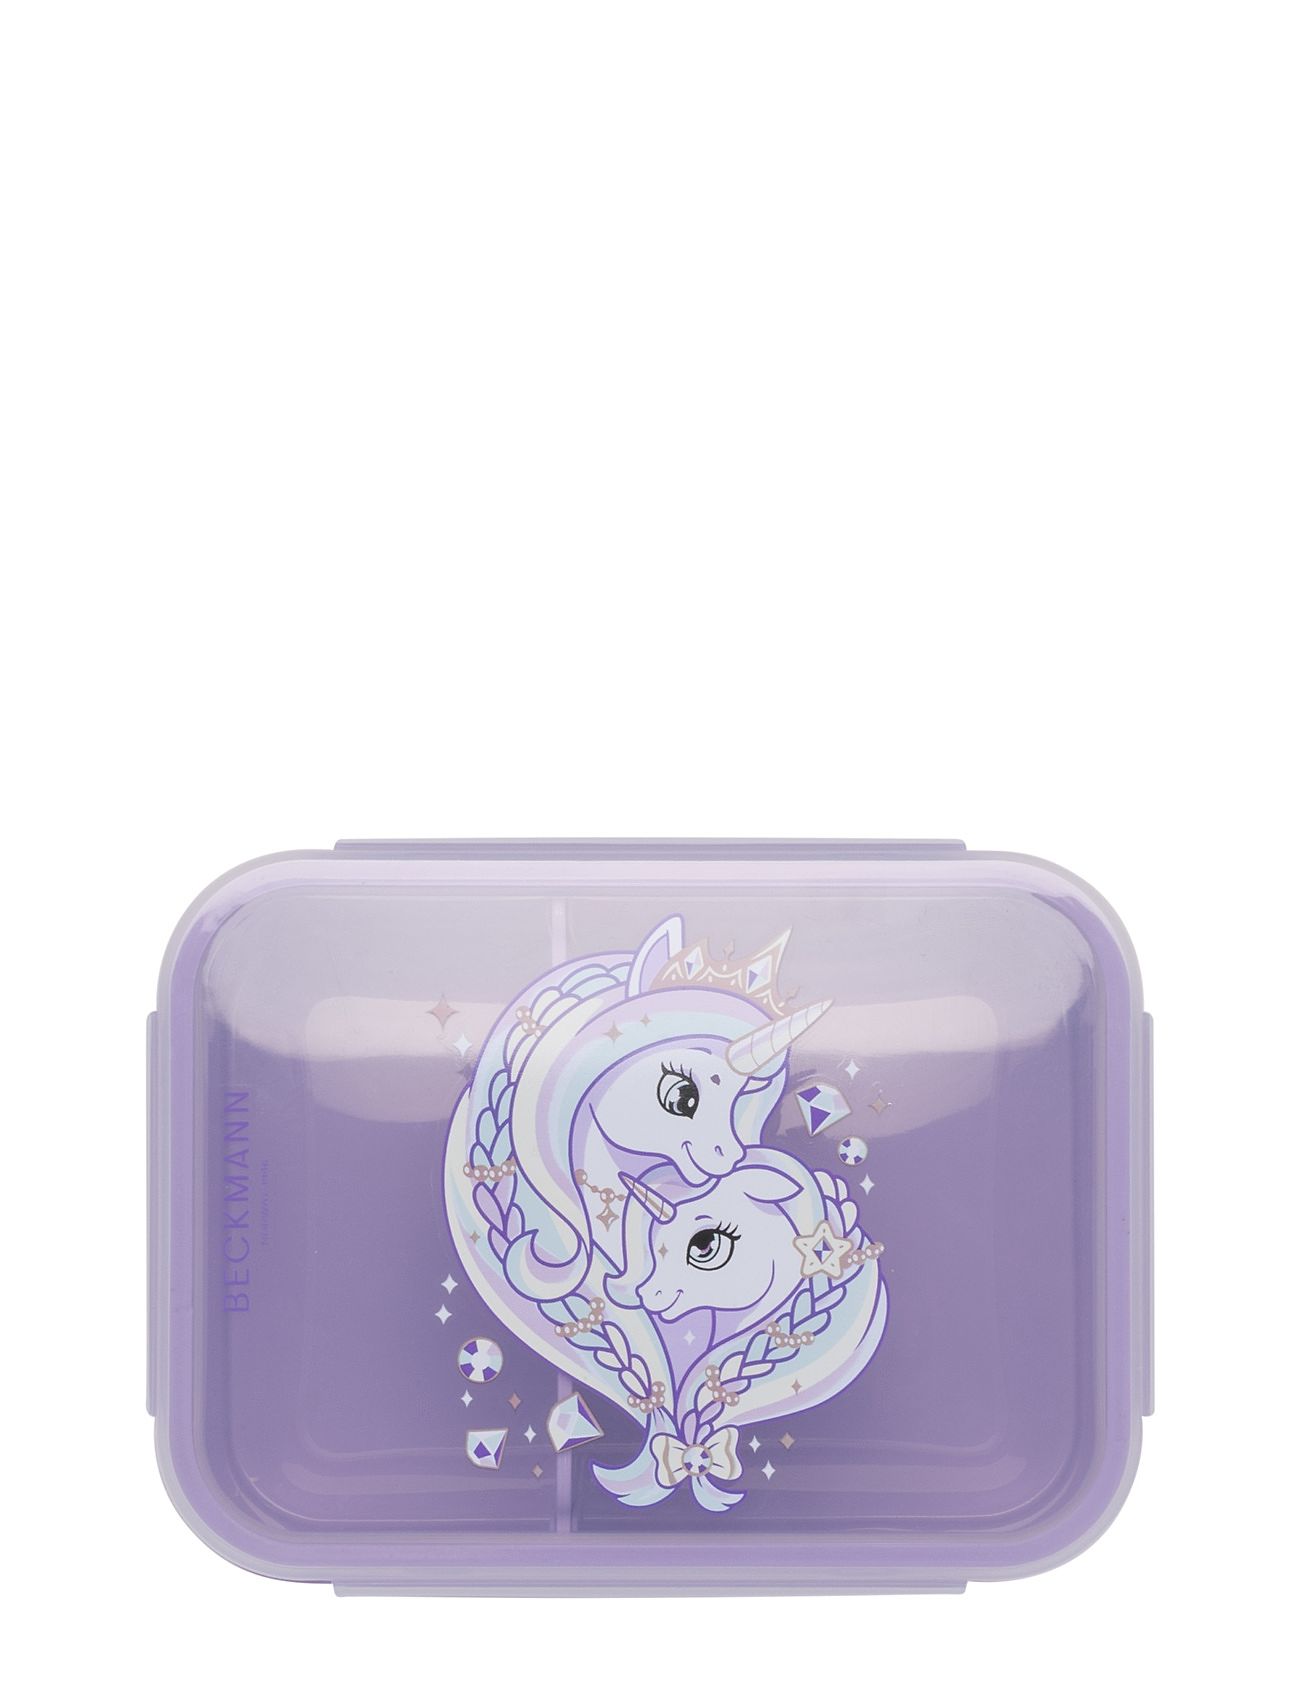 Lunchbox, Unicorn Princess Home Meal Time Lunch Boxes Purple Beckmann Of Norway